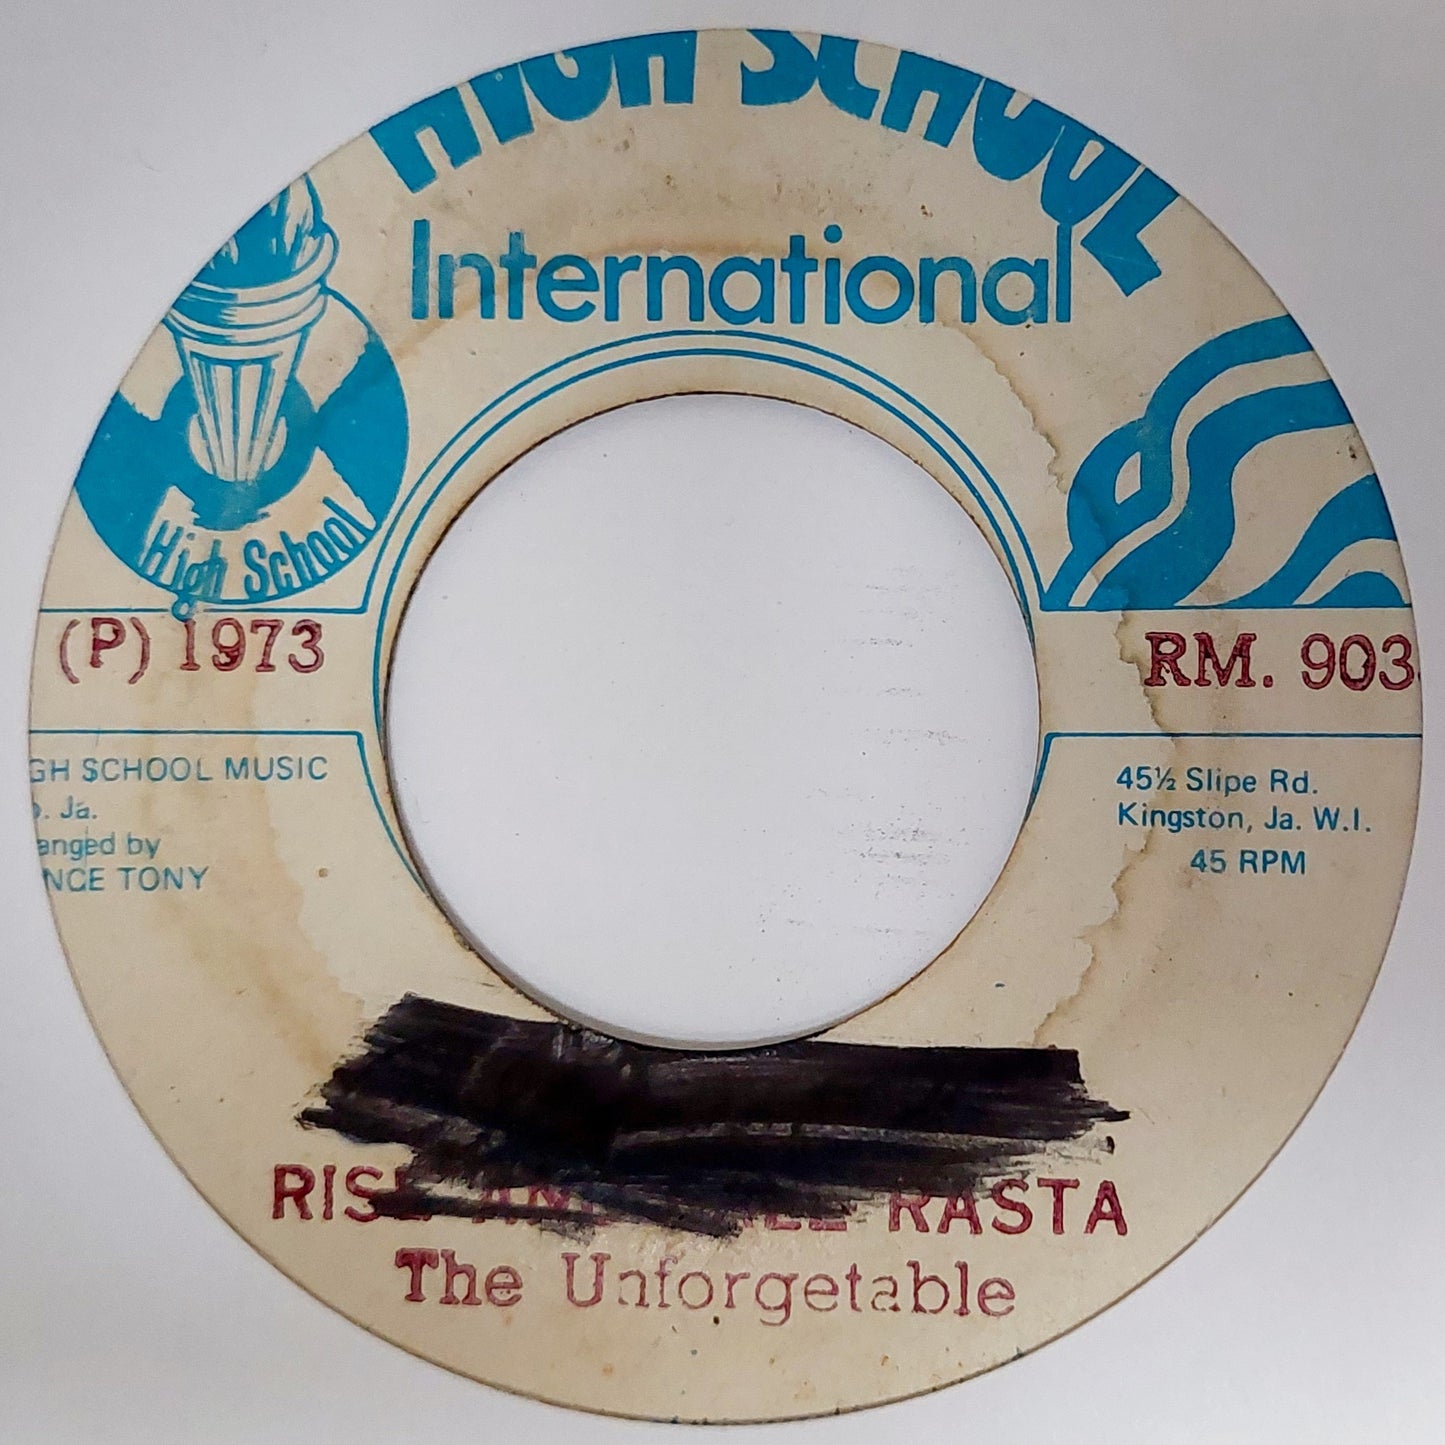 The Unforgetable - Rise And Fall Rasta